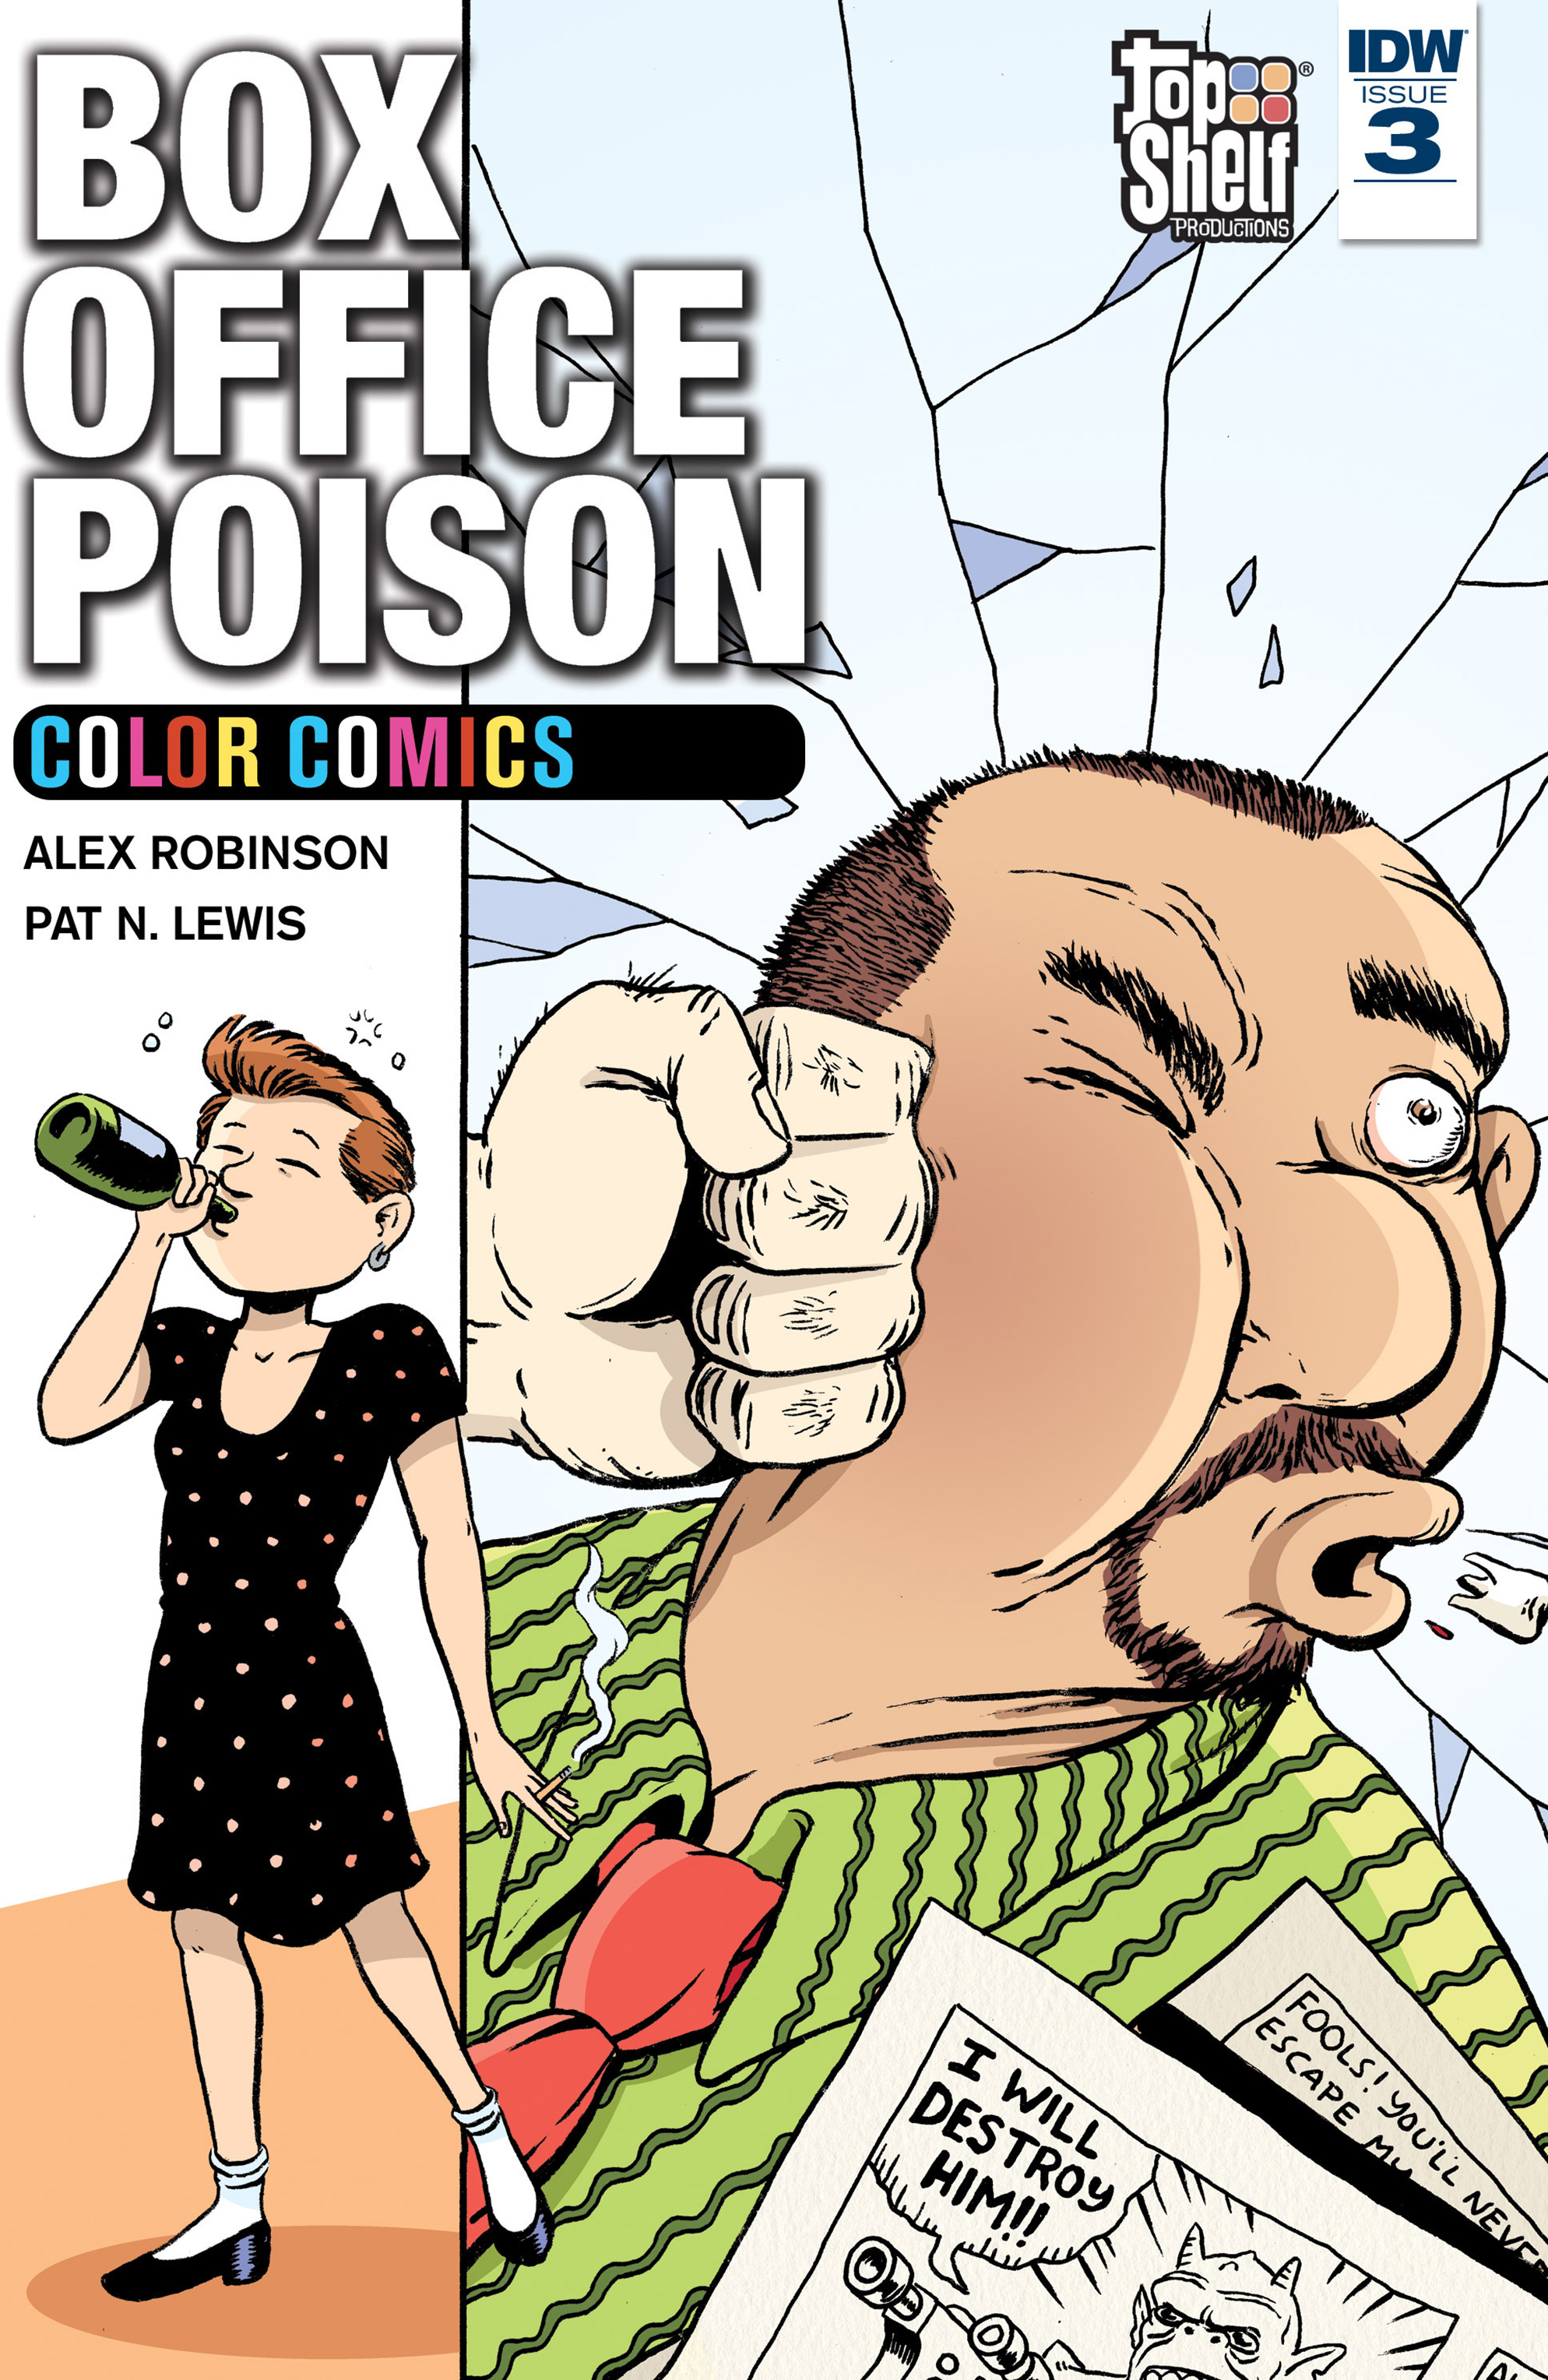 Read online Box Office Poison Color Comics comic -  Issue #3 - 1